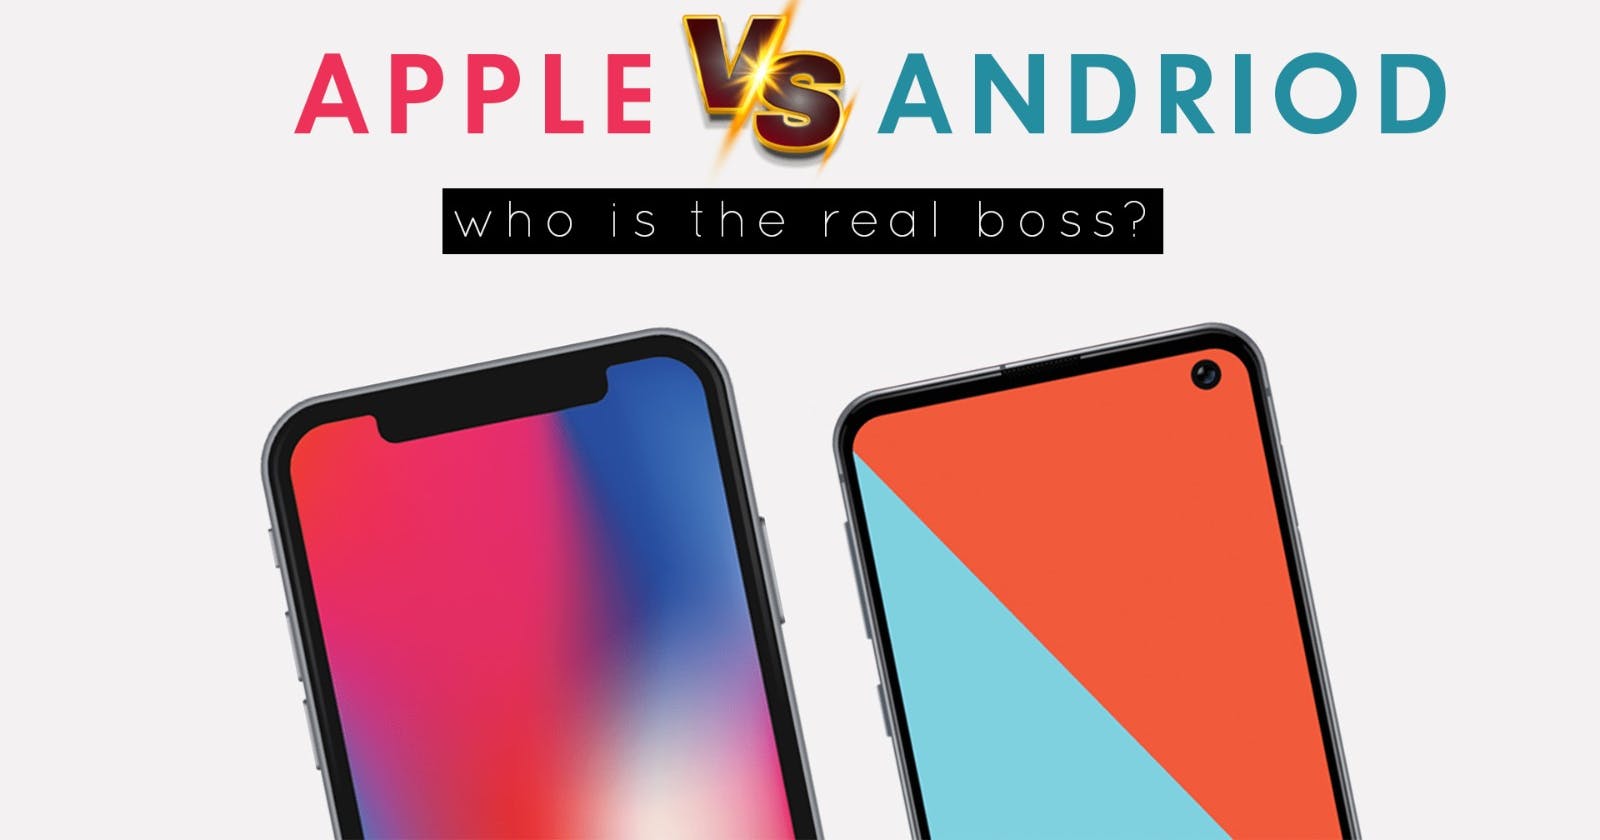 An analysis of Apple's dominance as a top brand in the mobile market